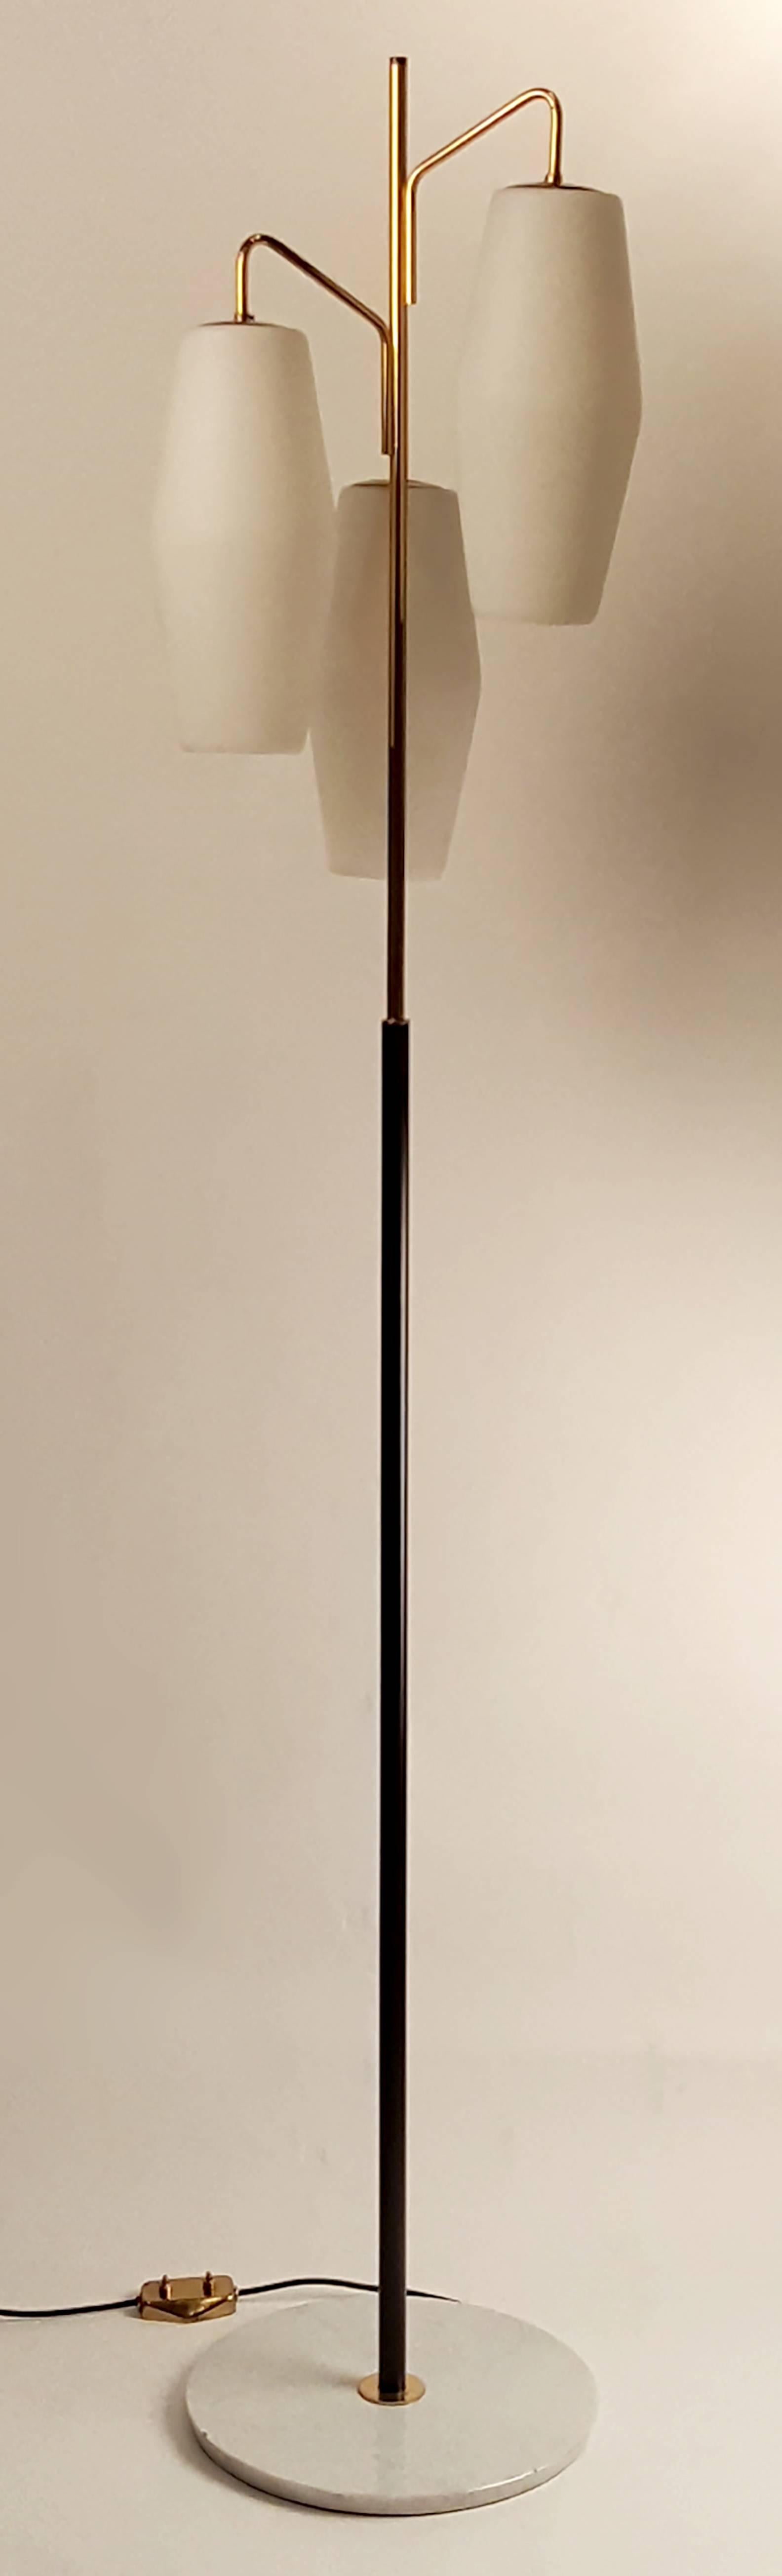 Mid-Century Modern Italian Modernist Stilnovo Floor Lamp with Frosted Glass Shades and Marble Base